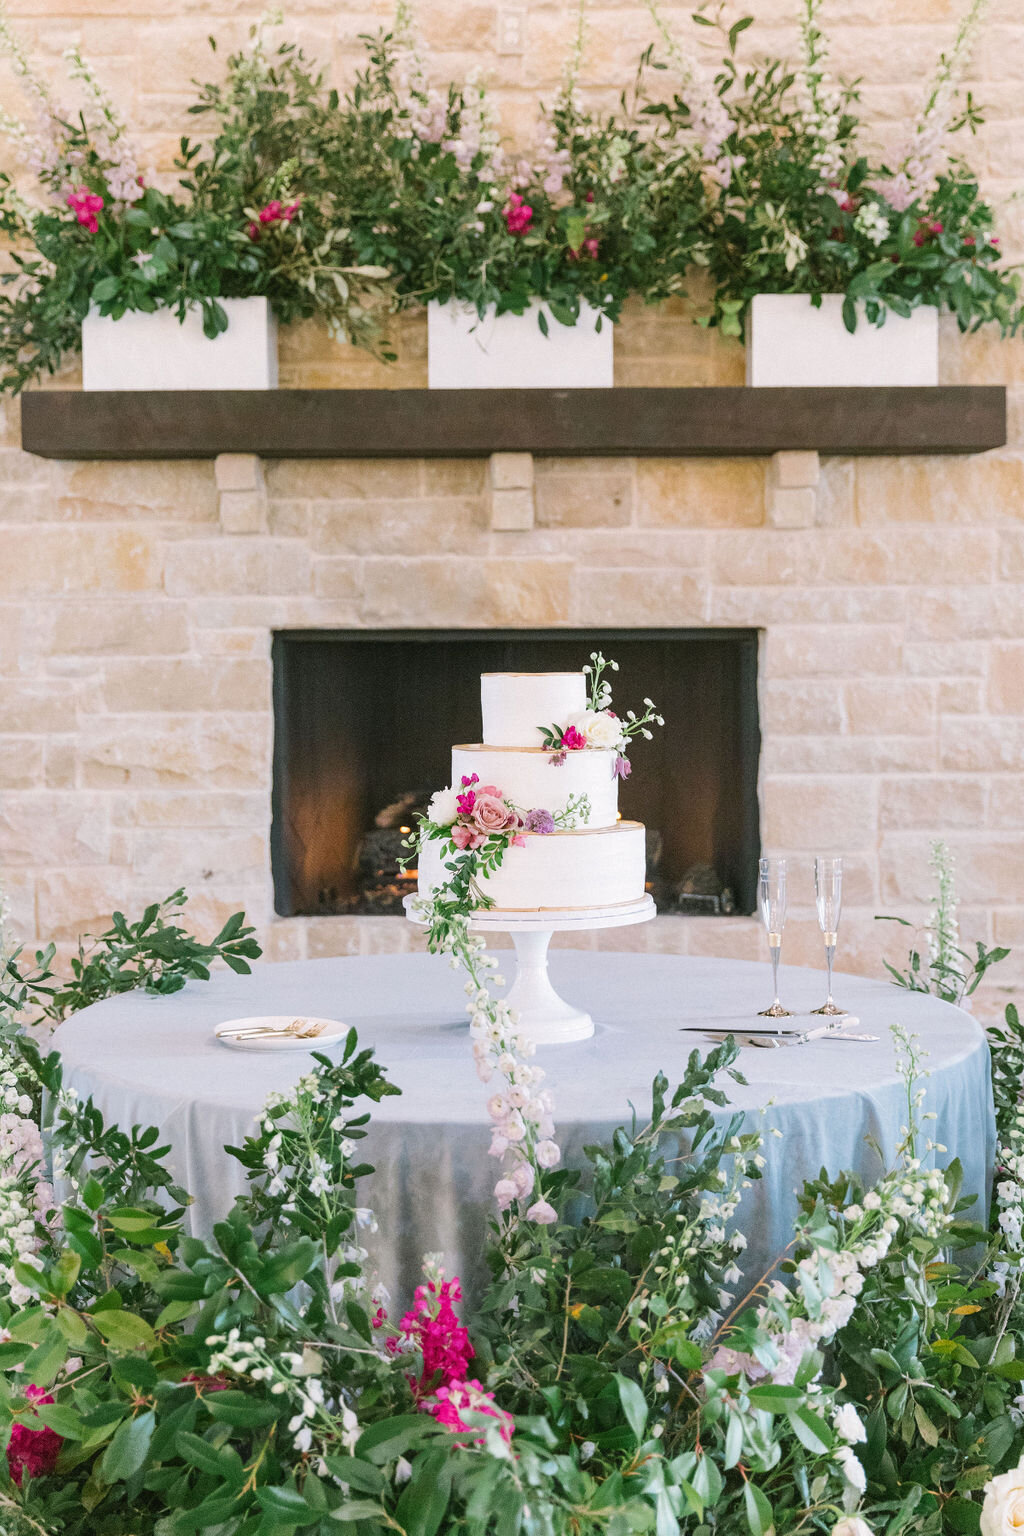 Cake on a blue linen with flowers around the base of the table